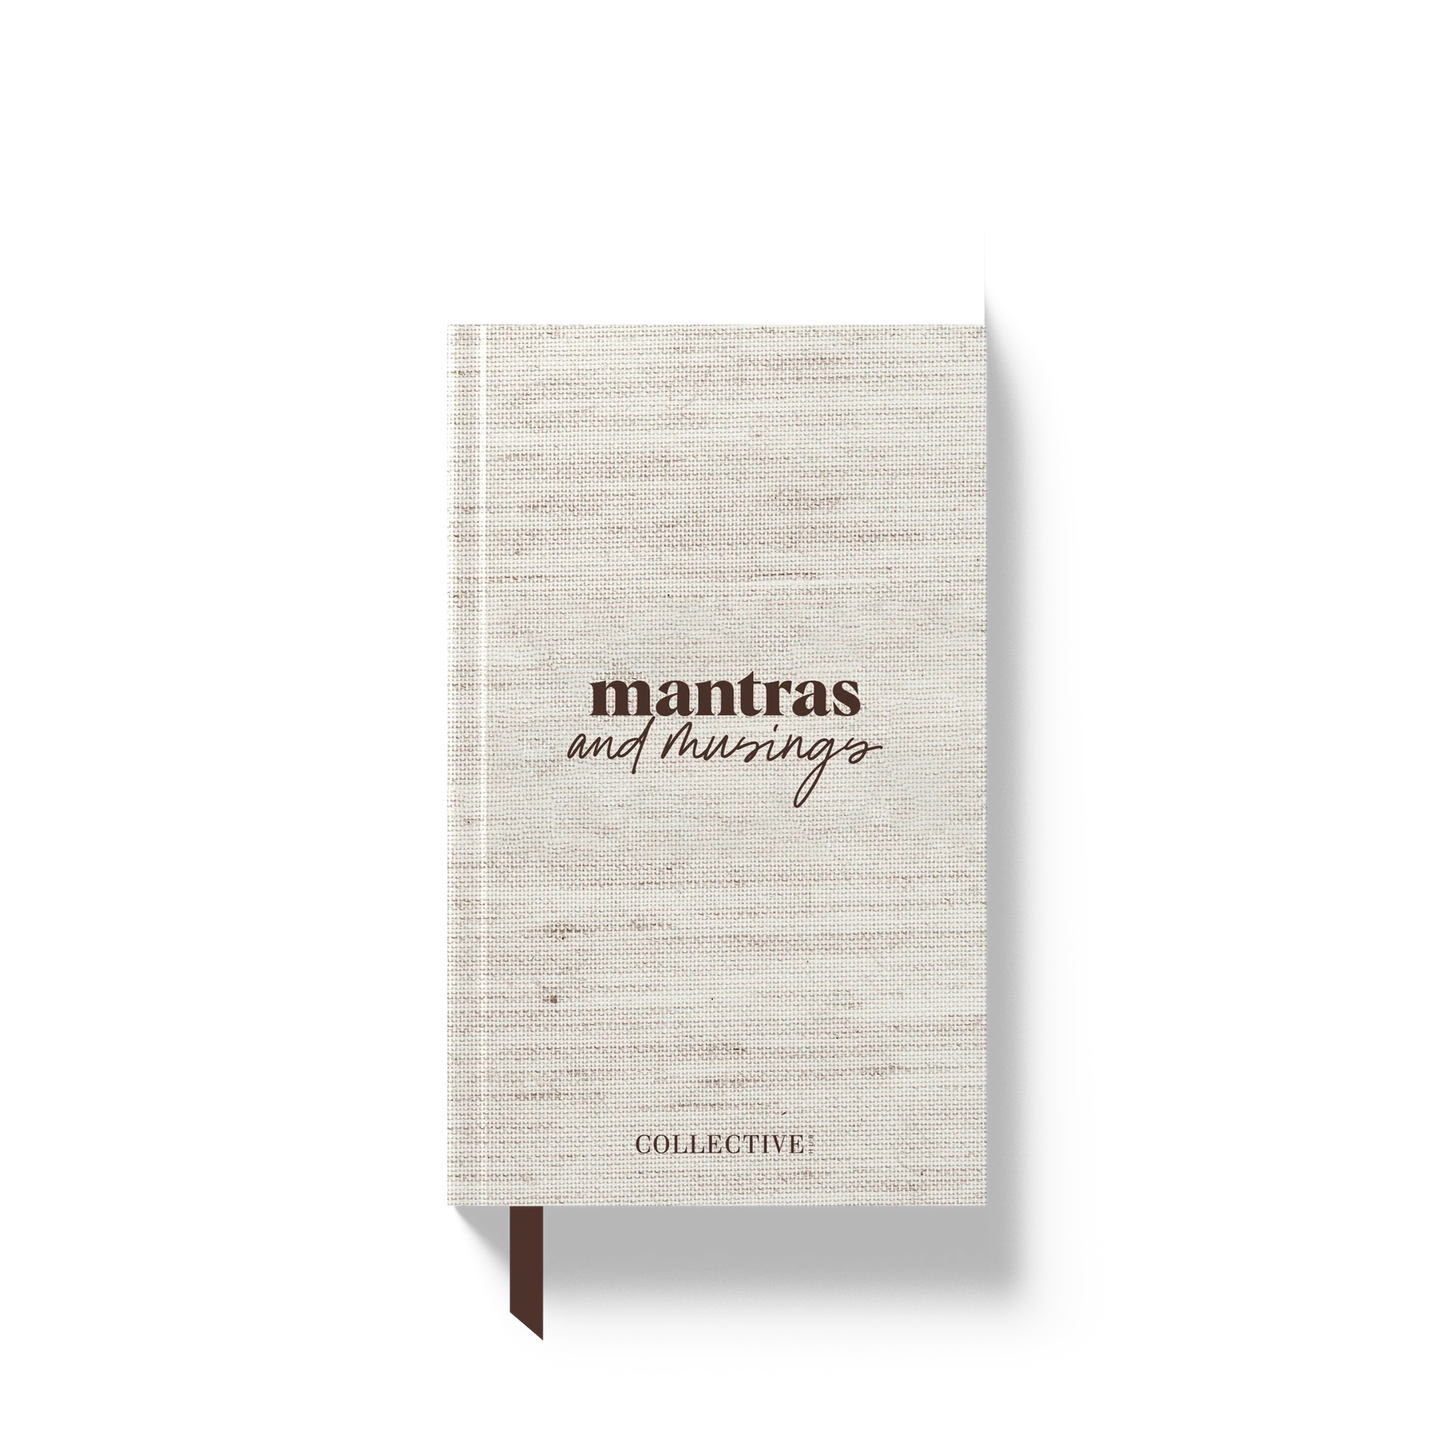 Mantras & musing book cover